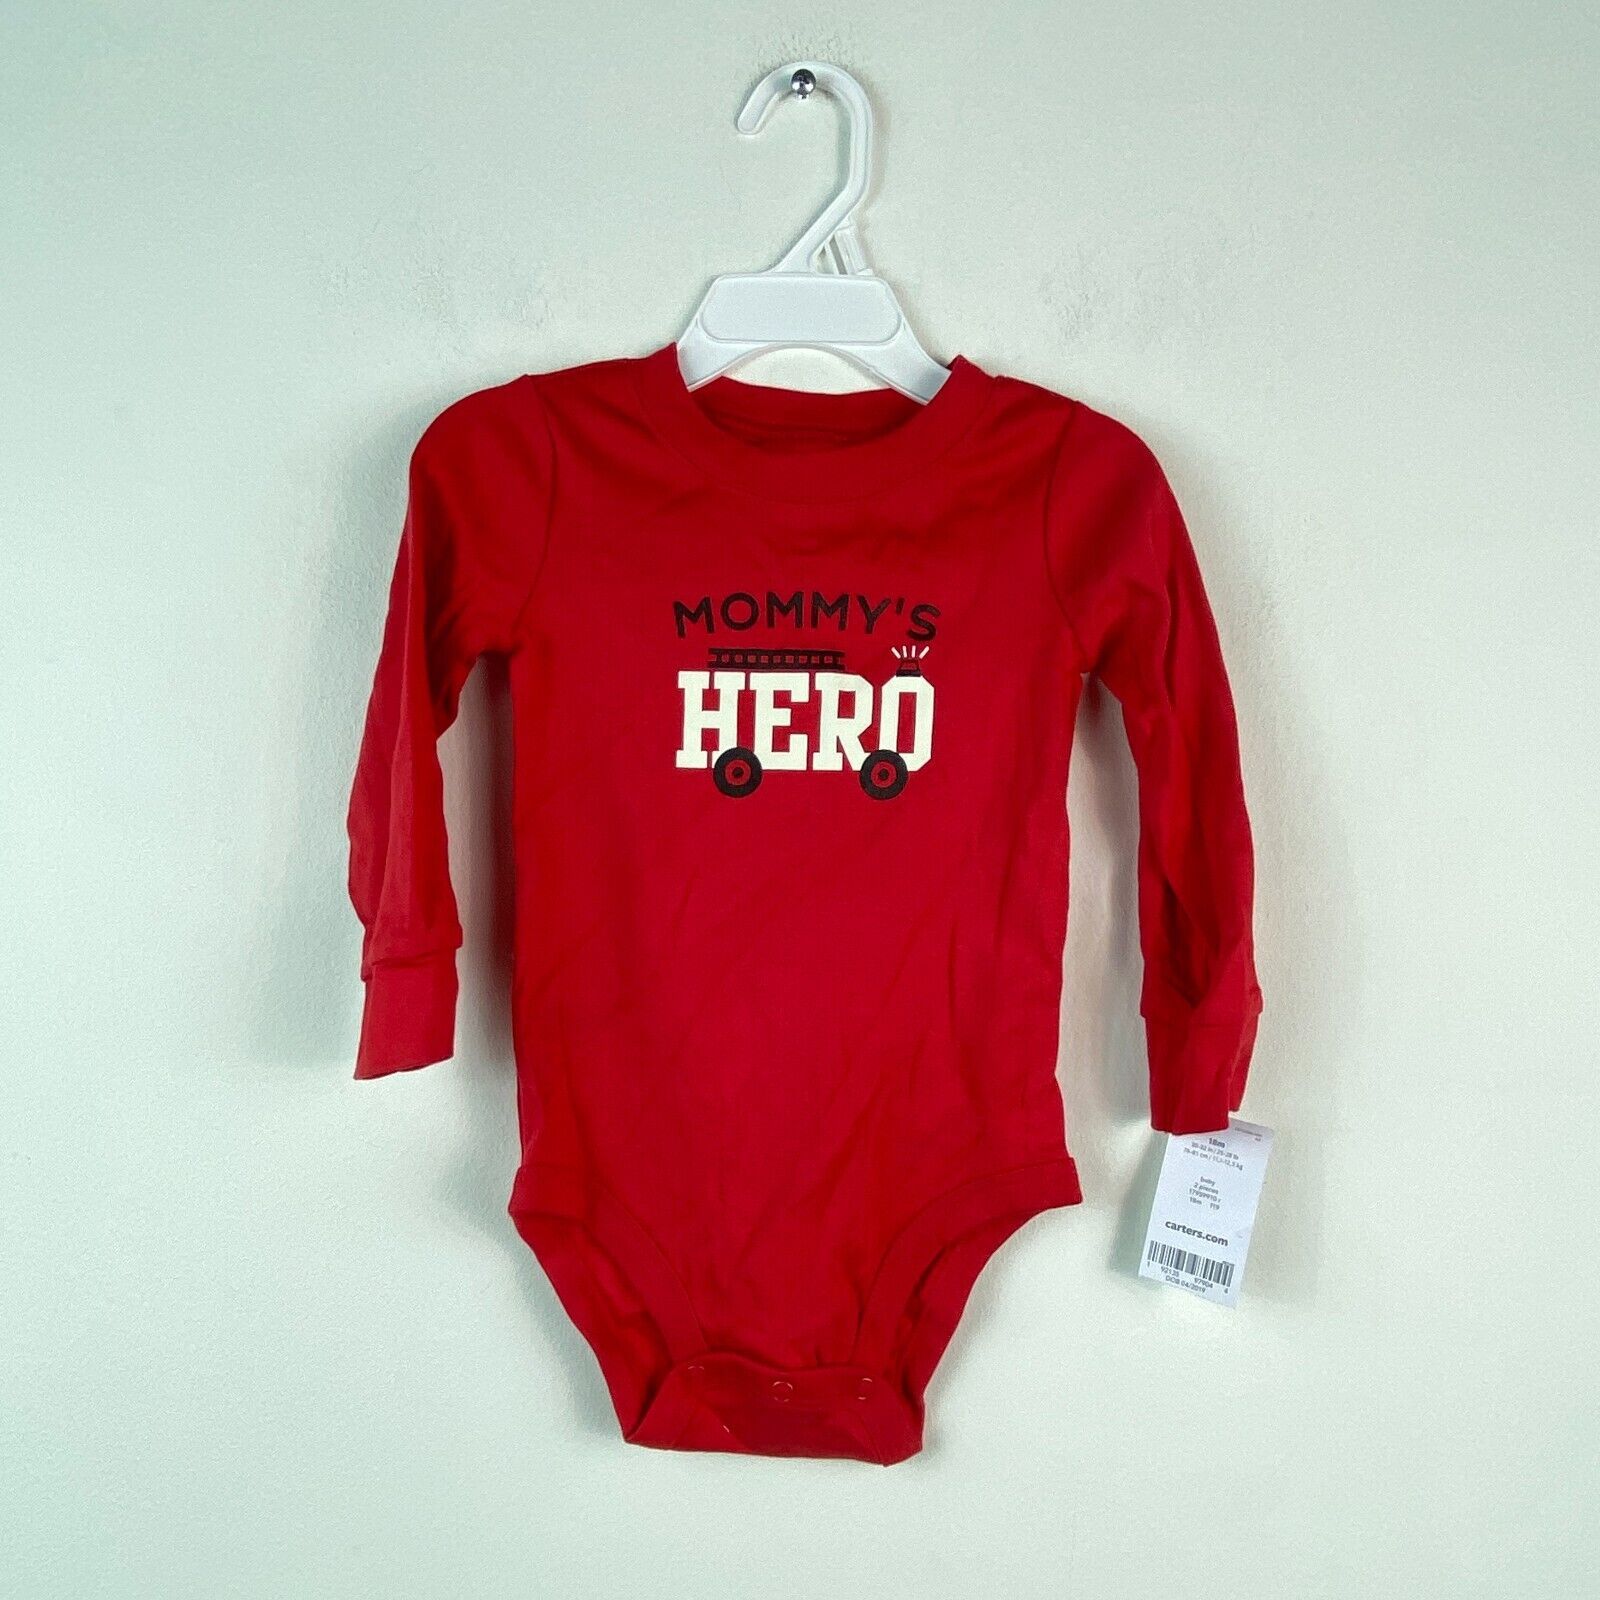 Primary image for Carters Baby Boys 18M Red Firetruck Long Sleeve Mommy Hero Bodysuit NWT AW13